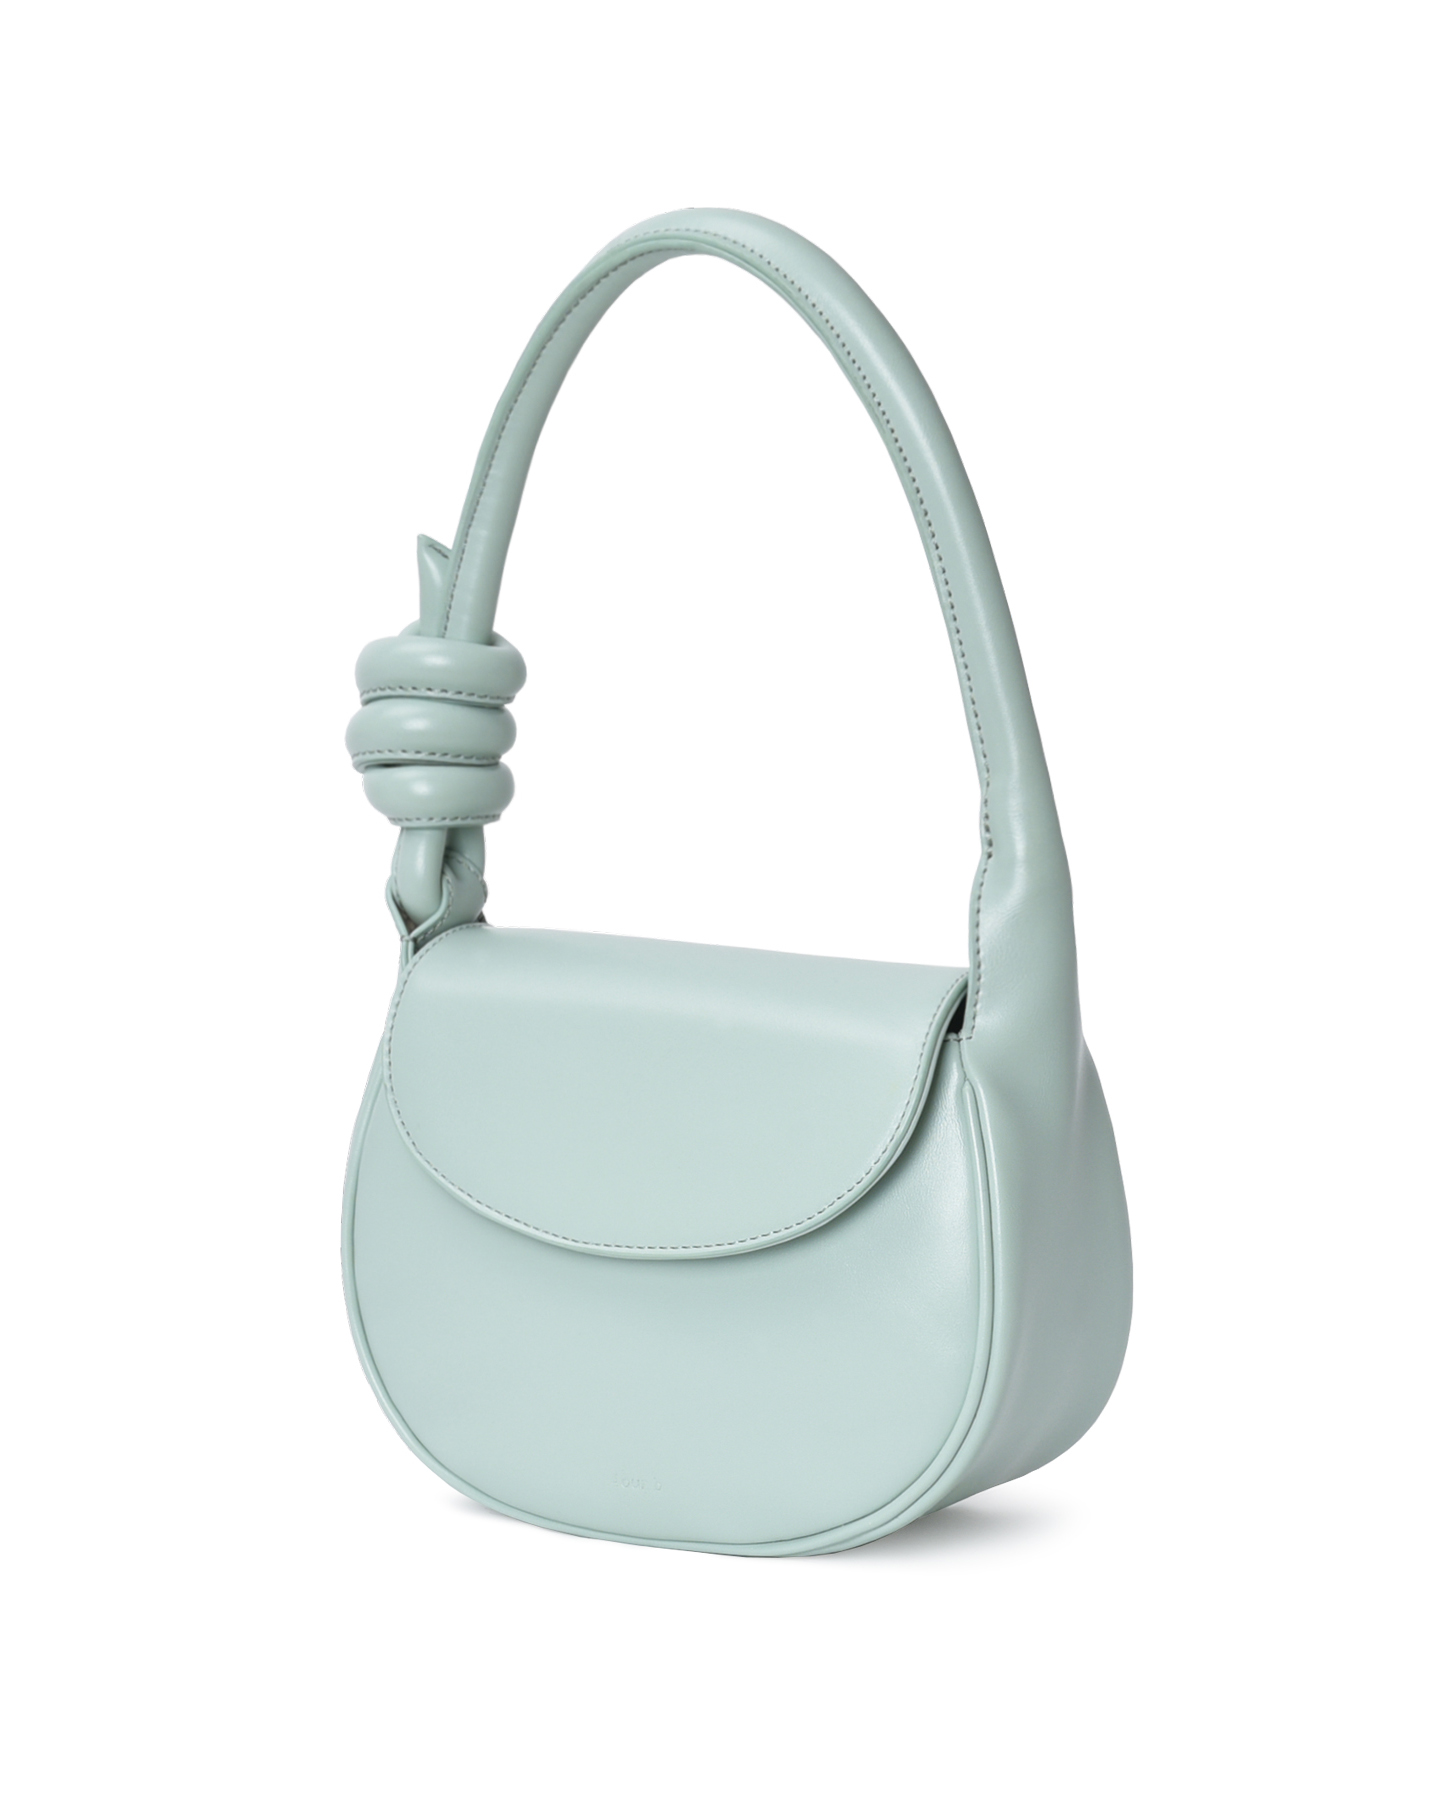 70% off / Dolphin Bag Mint